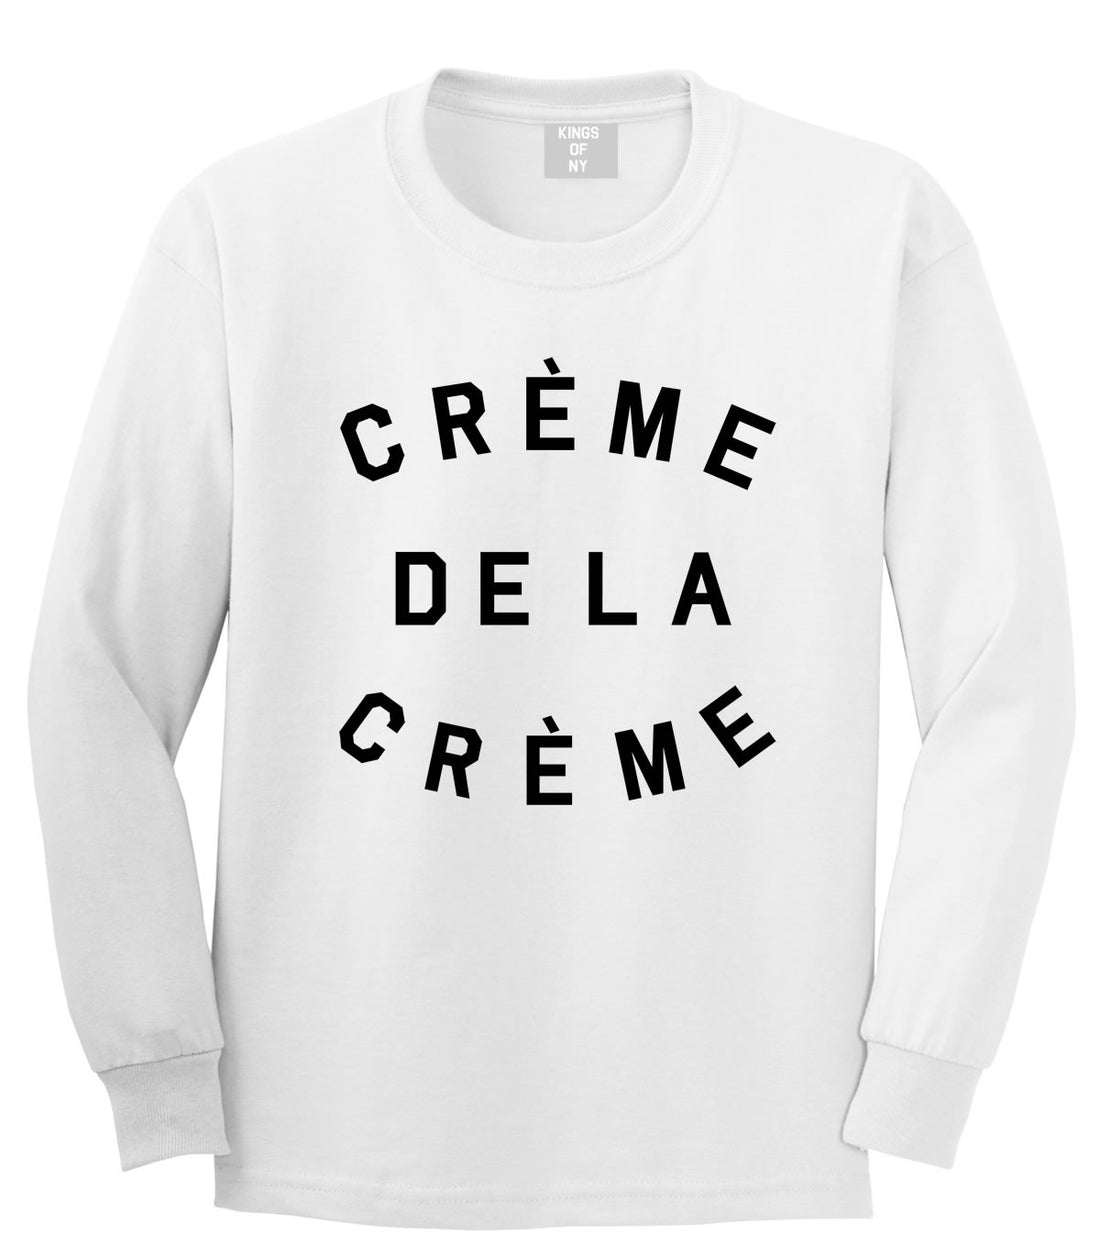 Creme De La Creme Celebrity Fashion Crop Long Sleeve T-Shirt in White by Kings Of NY